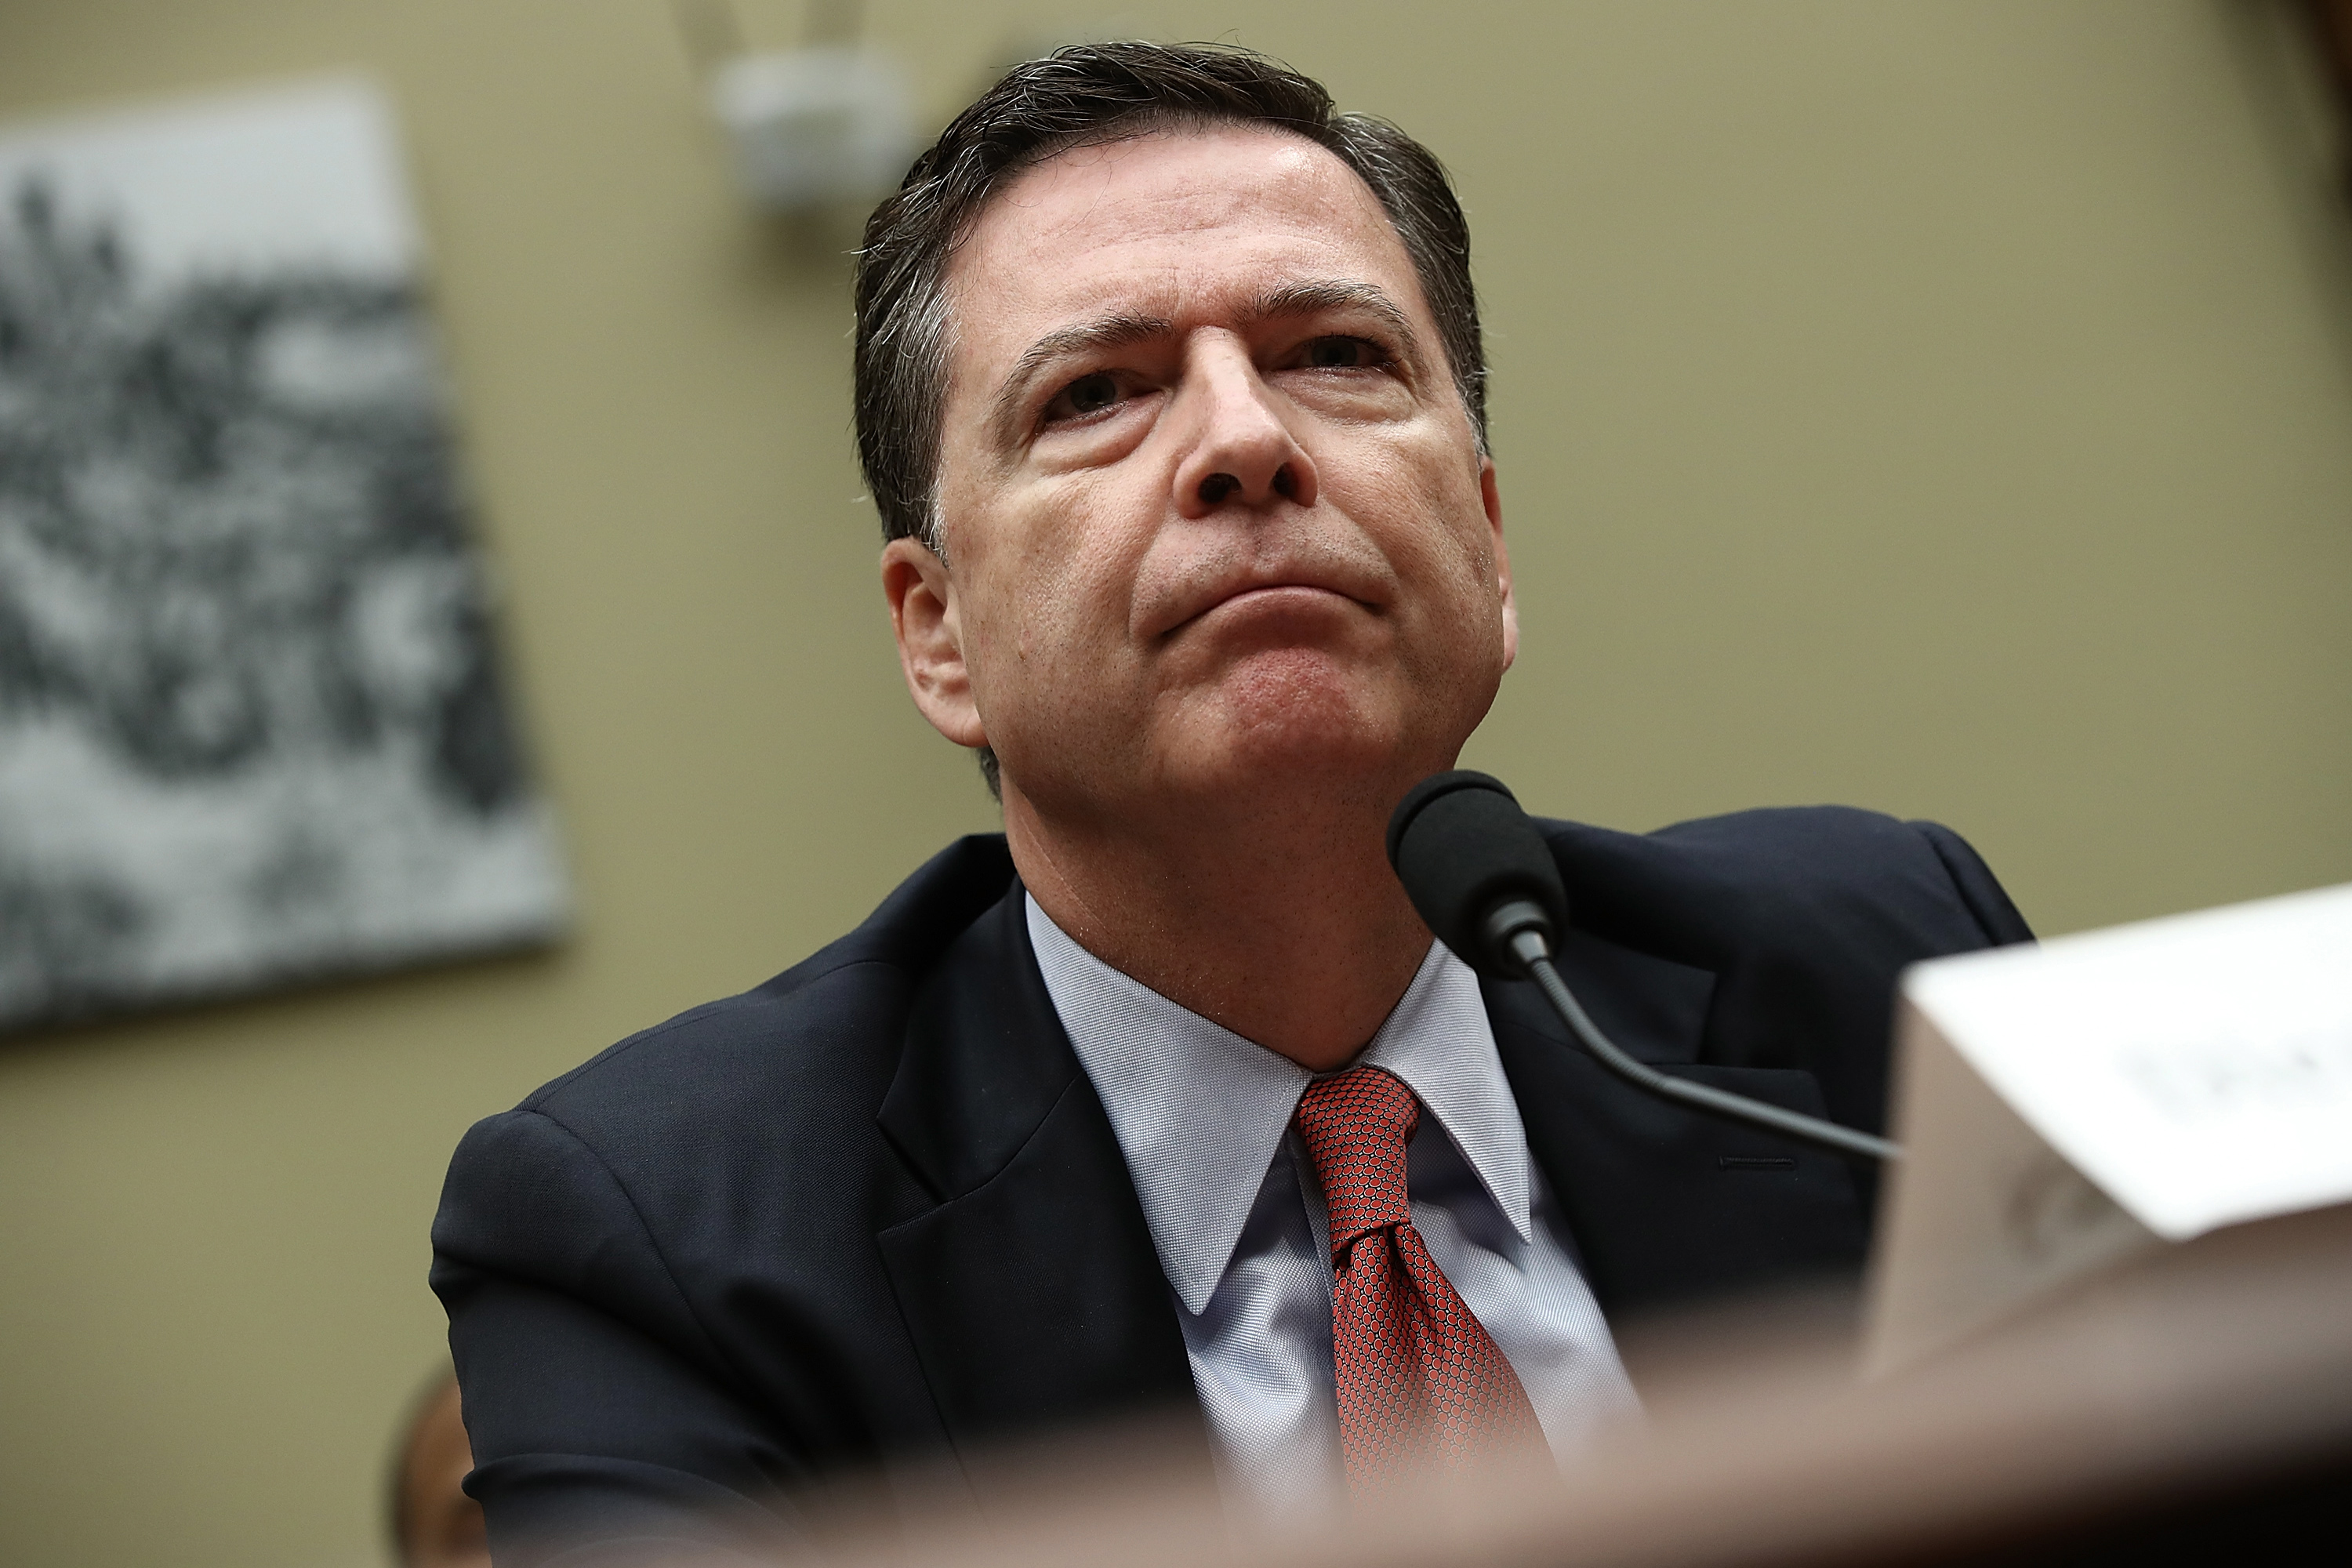 James Comey testifies before the House Judiciary Committee on Sept. 28.